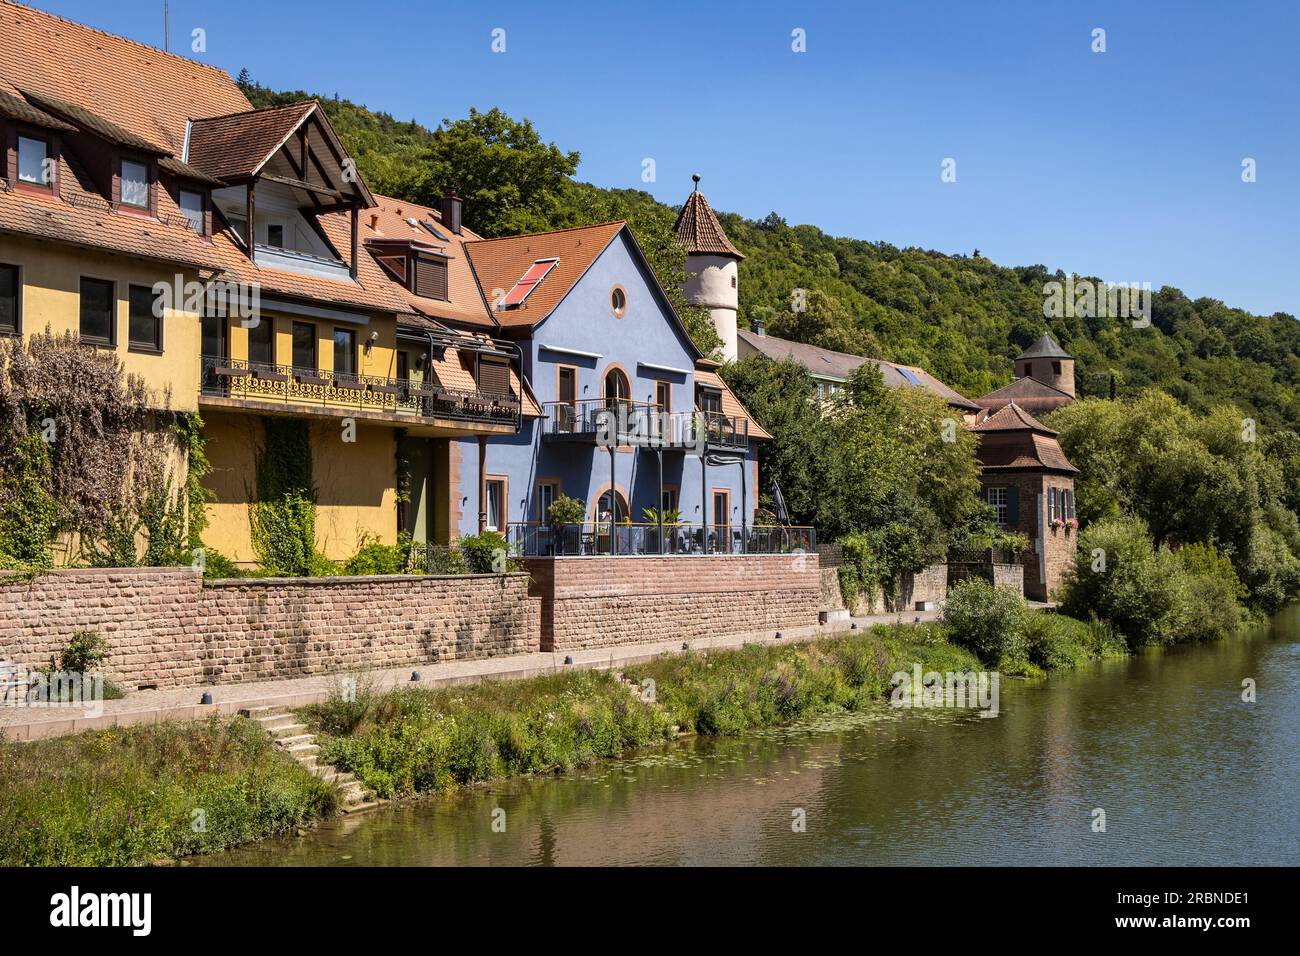 Houses along the Tauber River, Wertheim, Franconia, Baden-Wuerttemberg, Germany, Europe Stock Photo